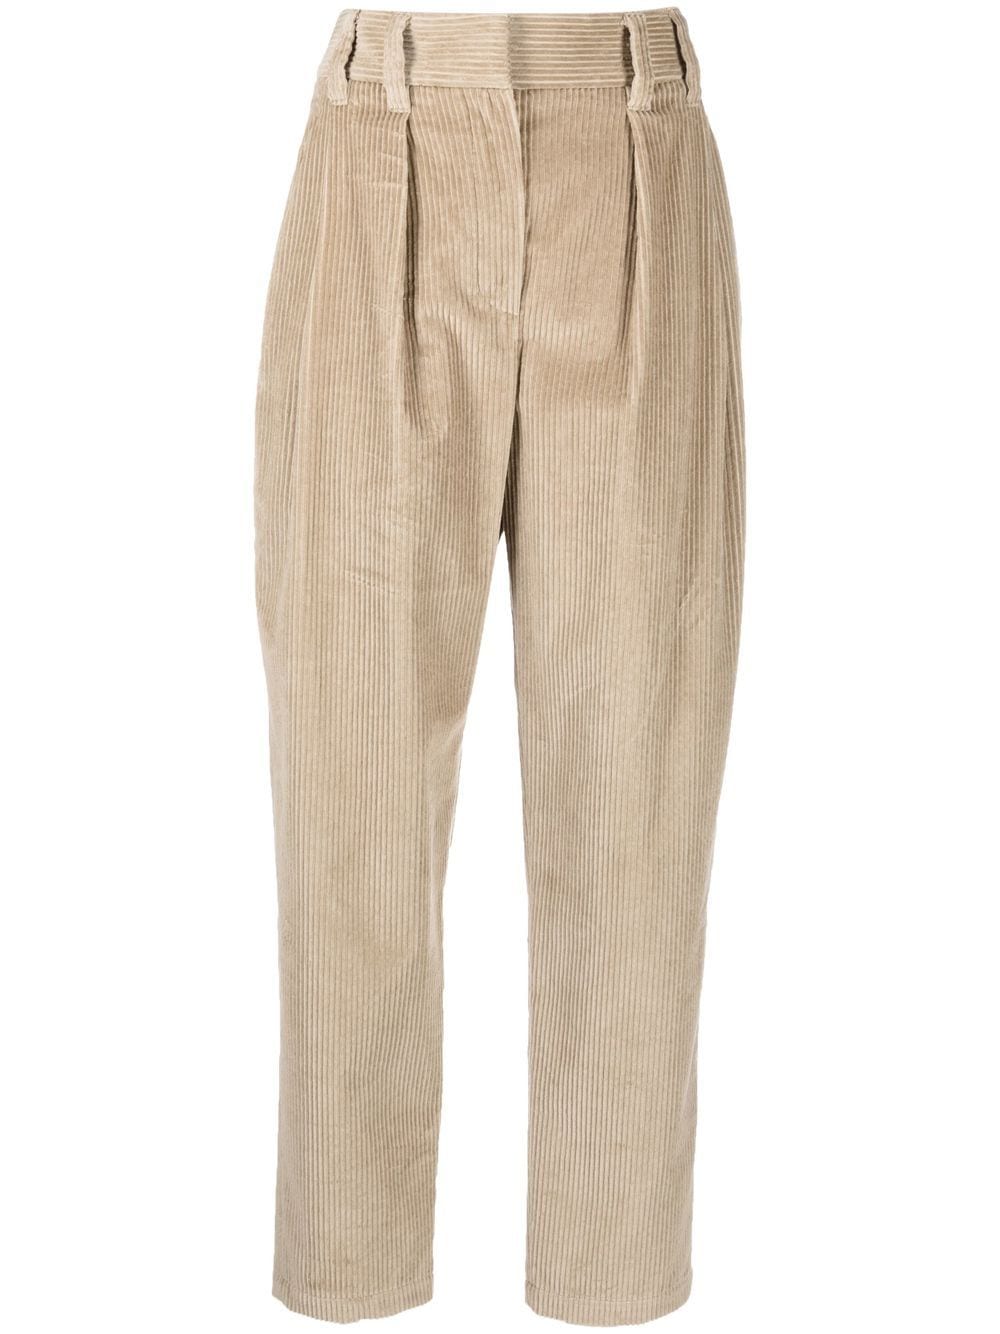 Image 1 of Brunello Cucinelli corduroy tapered trousers